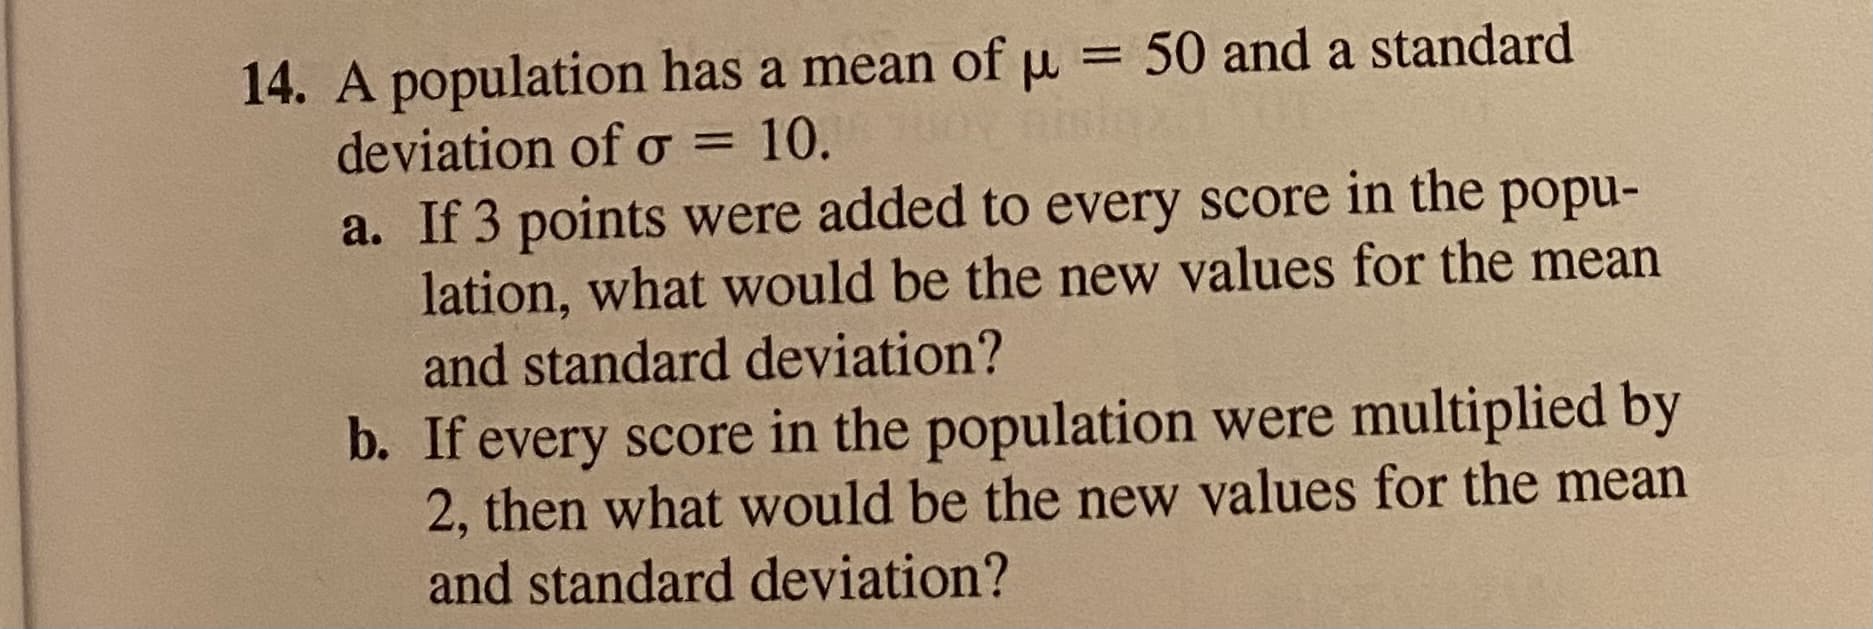 A population has a mean of u
deviation of o = 10.
a. If 3 points were added to every score in the popu-
lation, what would be the new values for the mean
and standard deviation?
= 50 and a standard
b. If every score in the population were multiplied by
2, then what would be the new values for the mean
and standard deviation?
